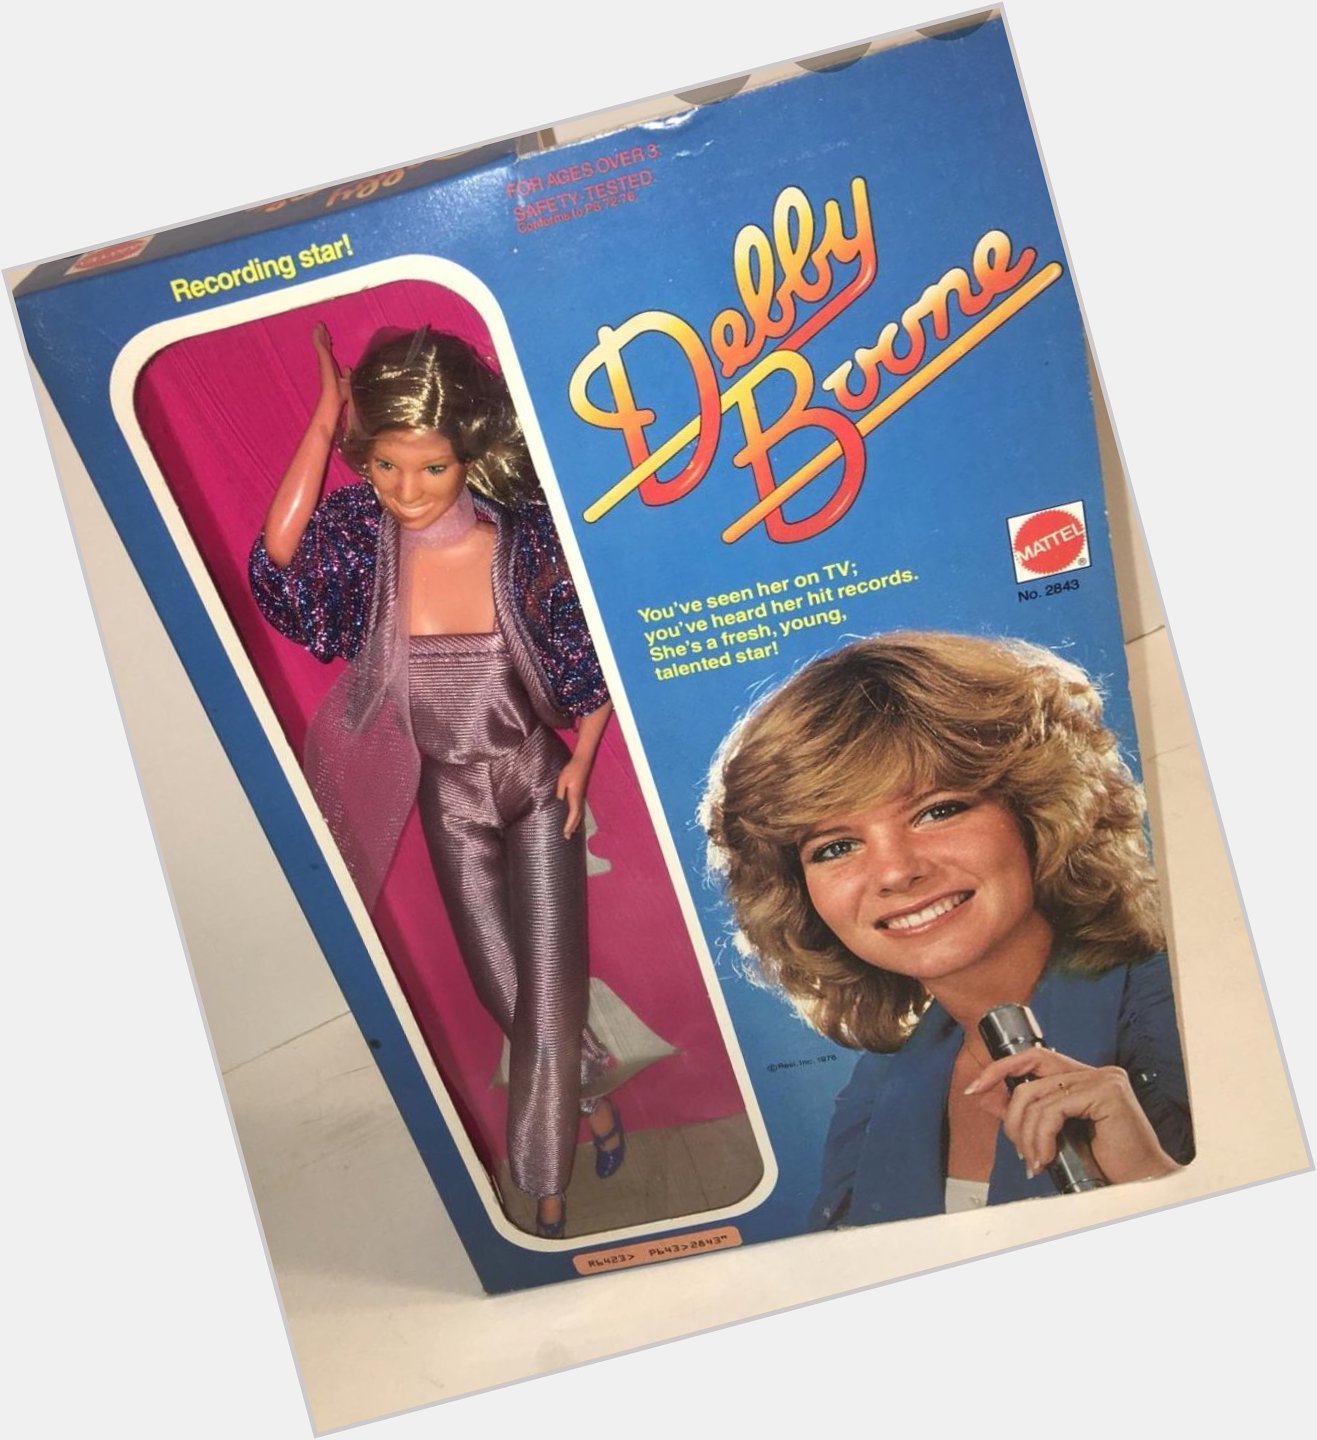  Now you can have a Debby Boone of your very own! Happy Birthday Mama 